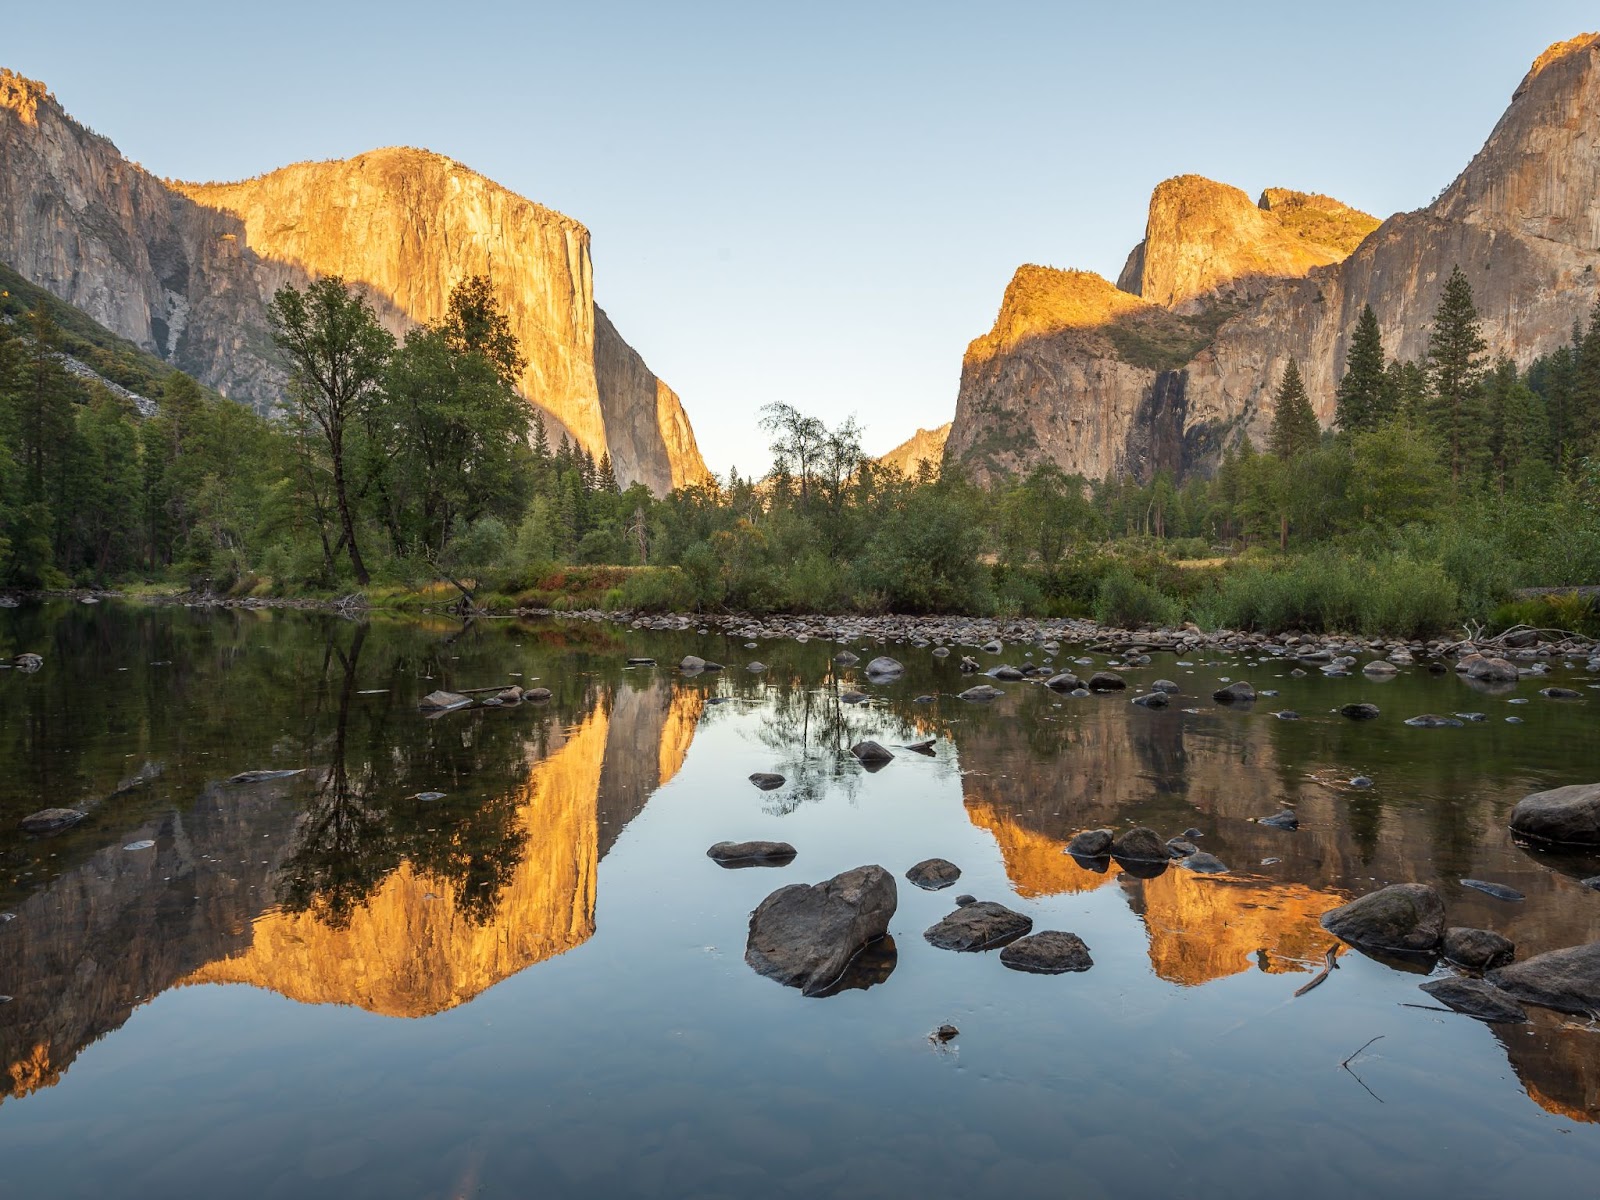 The Yosemite National Park, USA - 23 Top Sights to See Before You Die